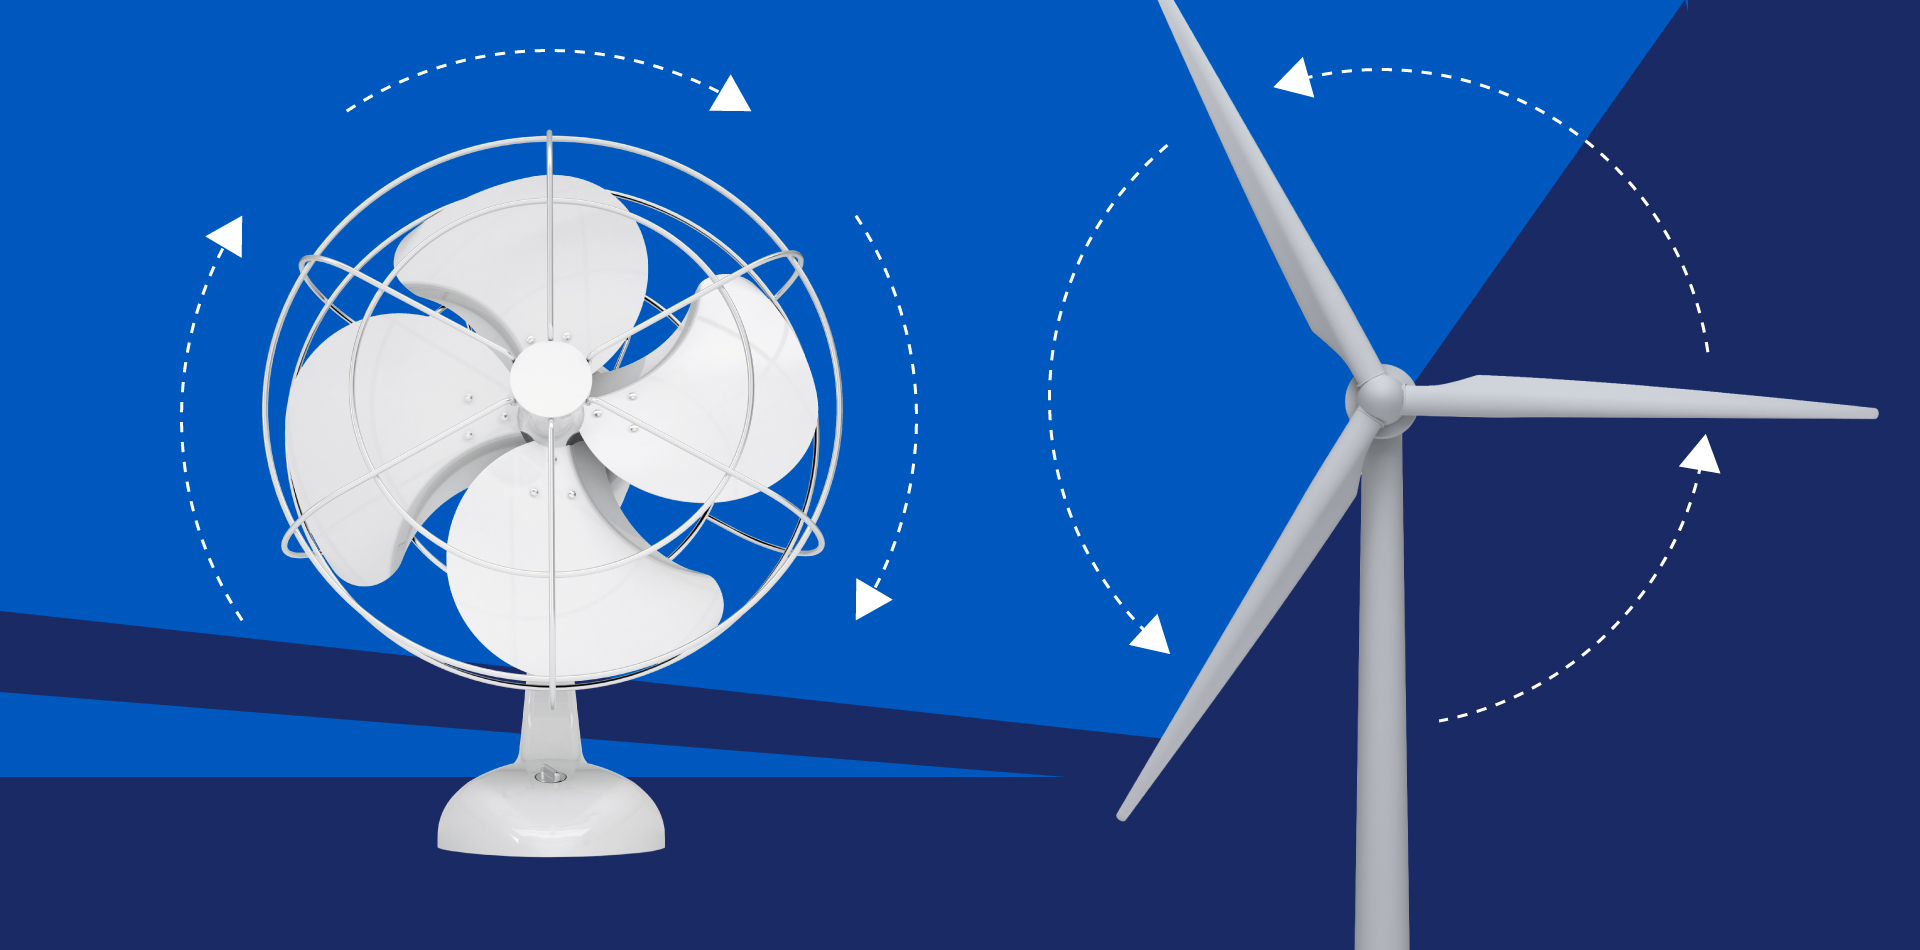 5 reasons why you should be wind power's biggest fan